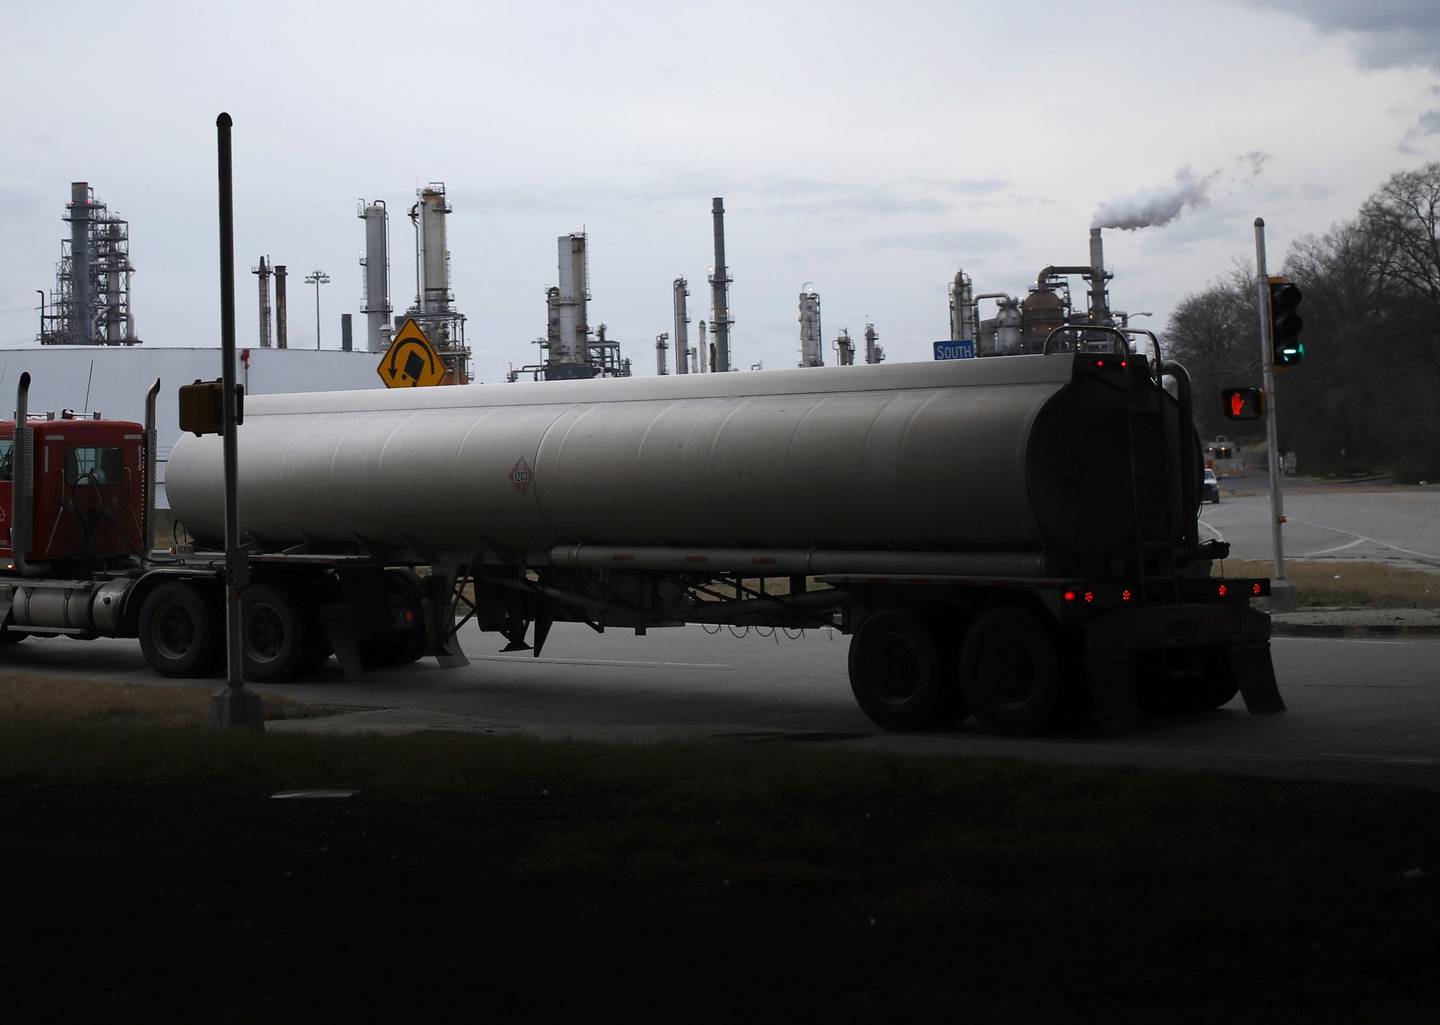 A gasoline tanker truck drives away from a Valero Energy Corp. oil refinery terminal in Memphis, Tennessee, U.S., on Wednesday, Feb. 16, 2022.